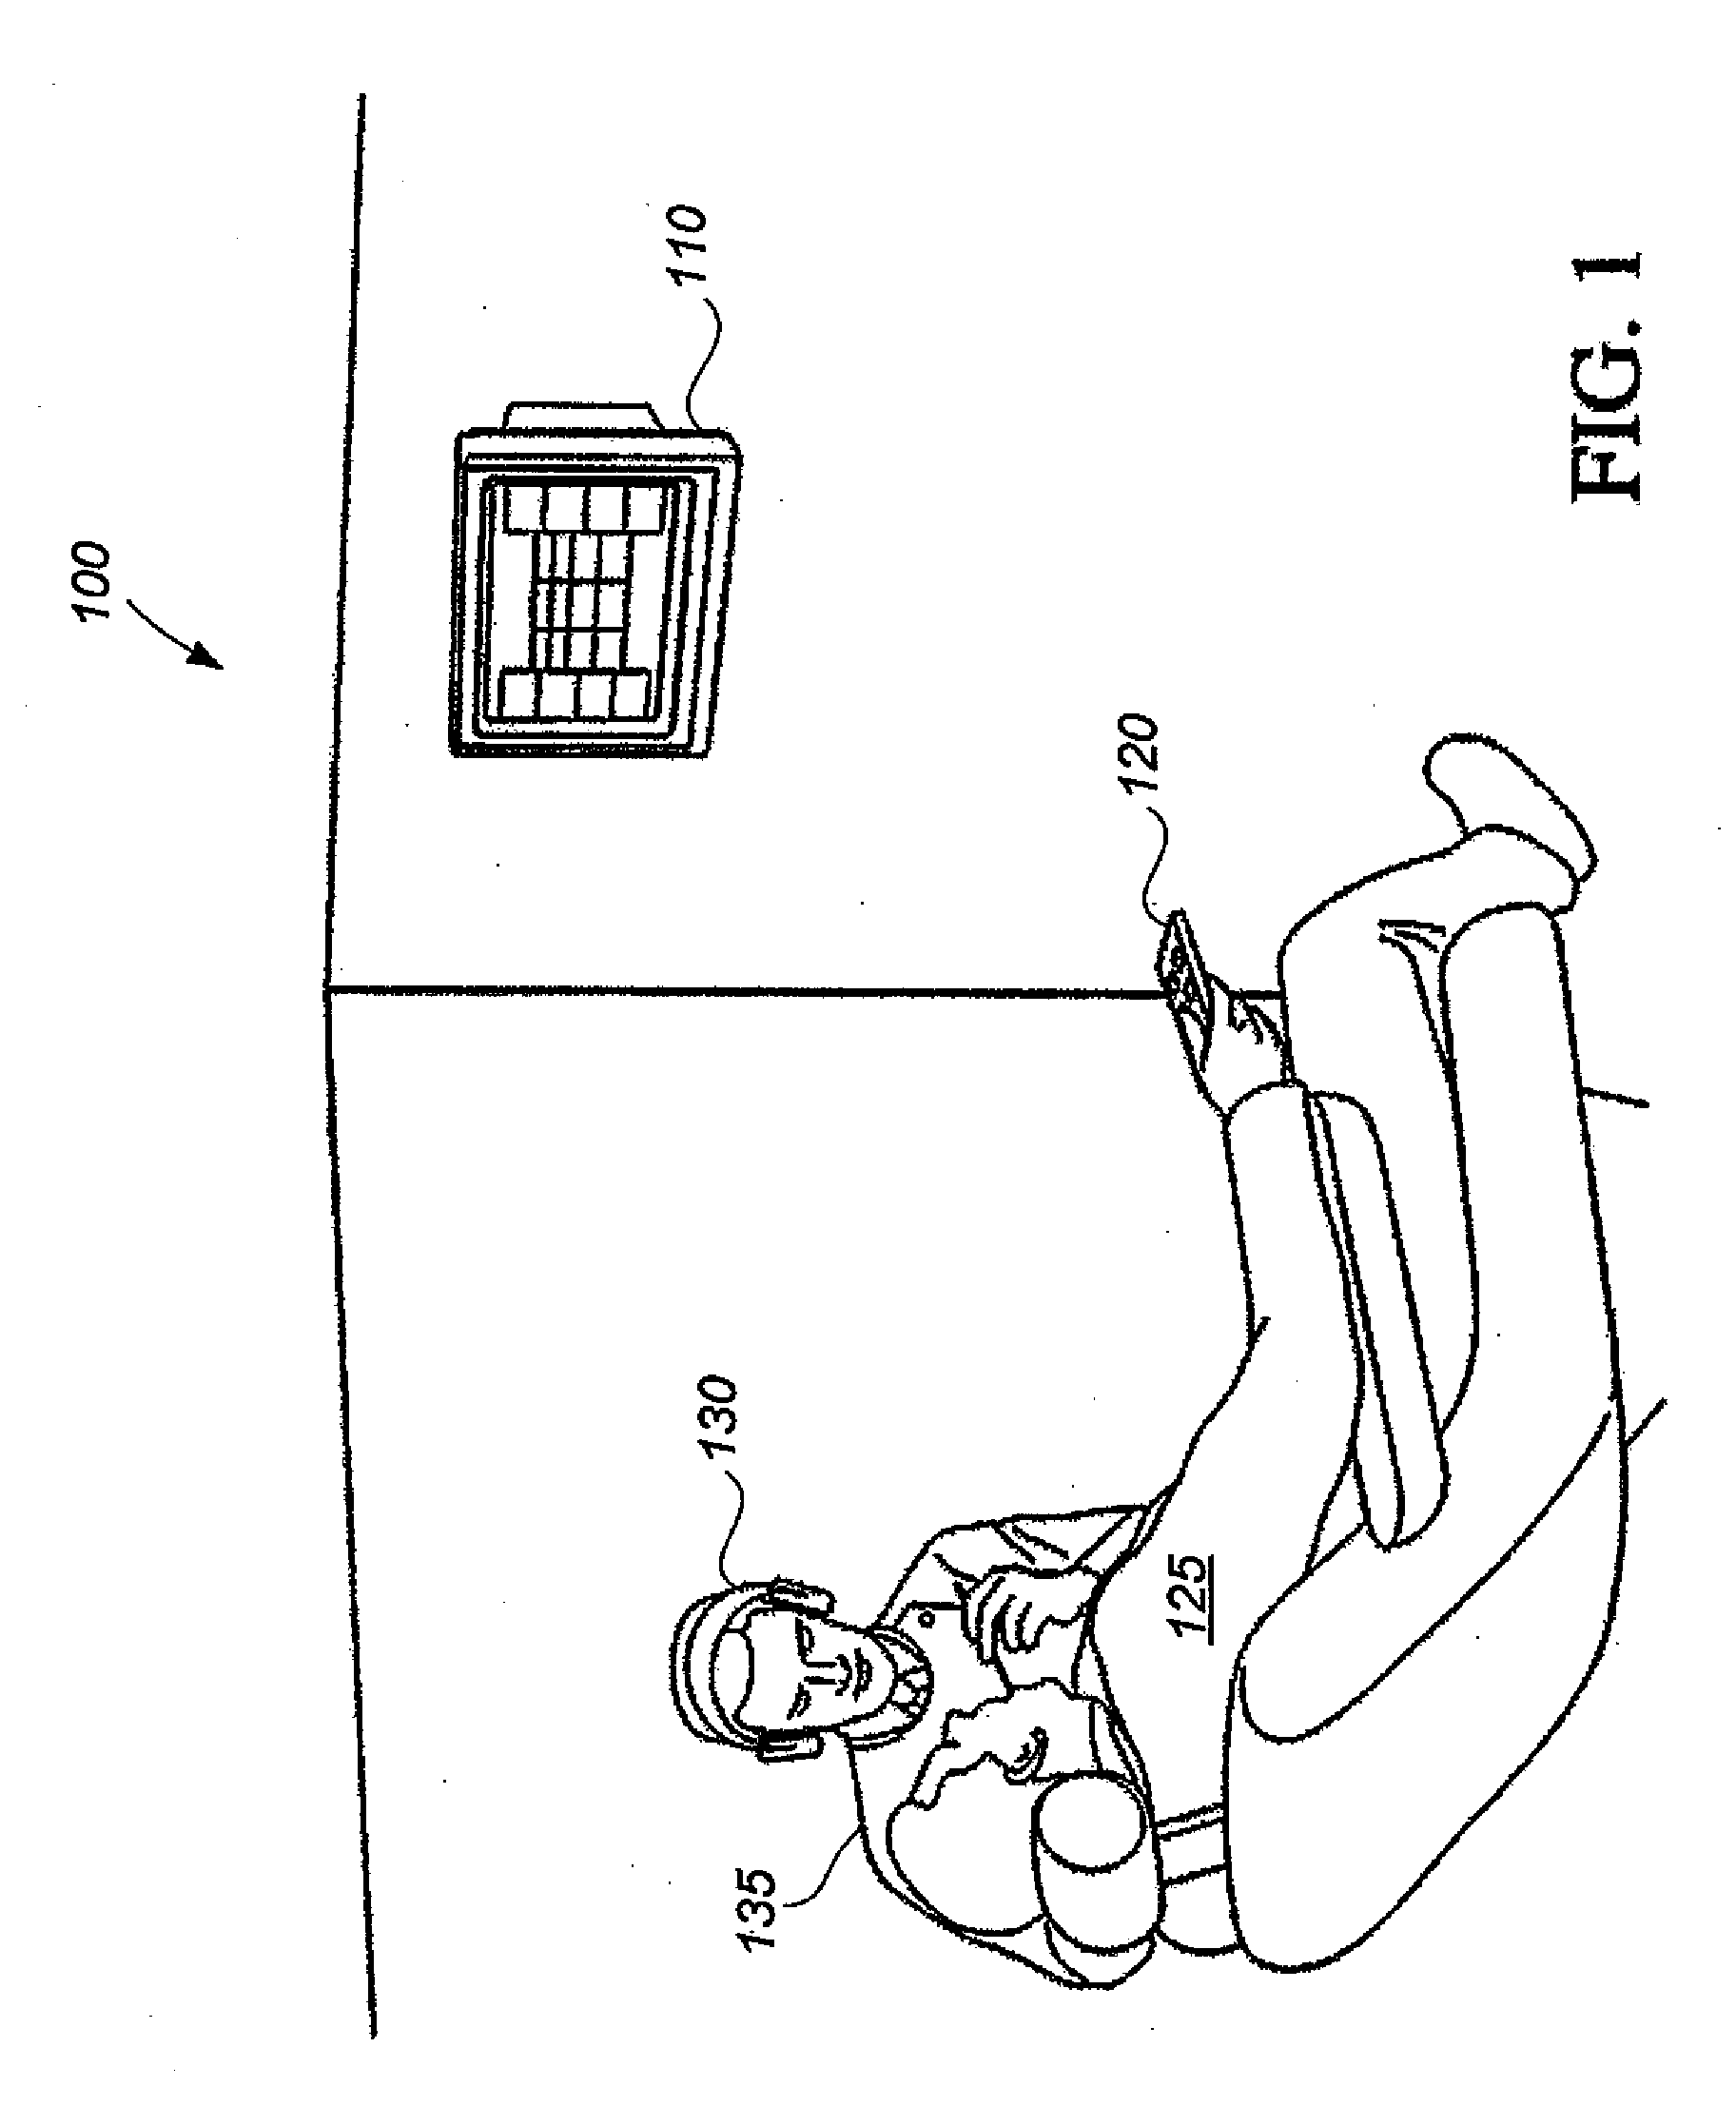 Systems and methods for verbal communication from a speech impaired individual